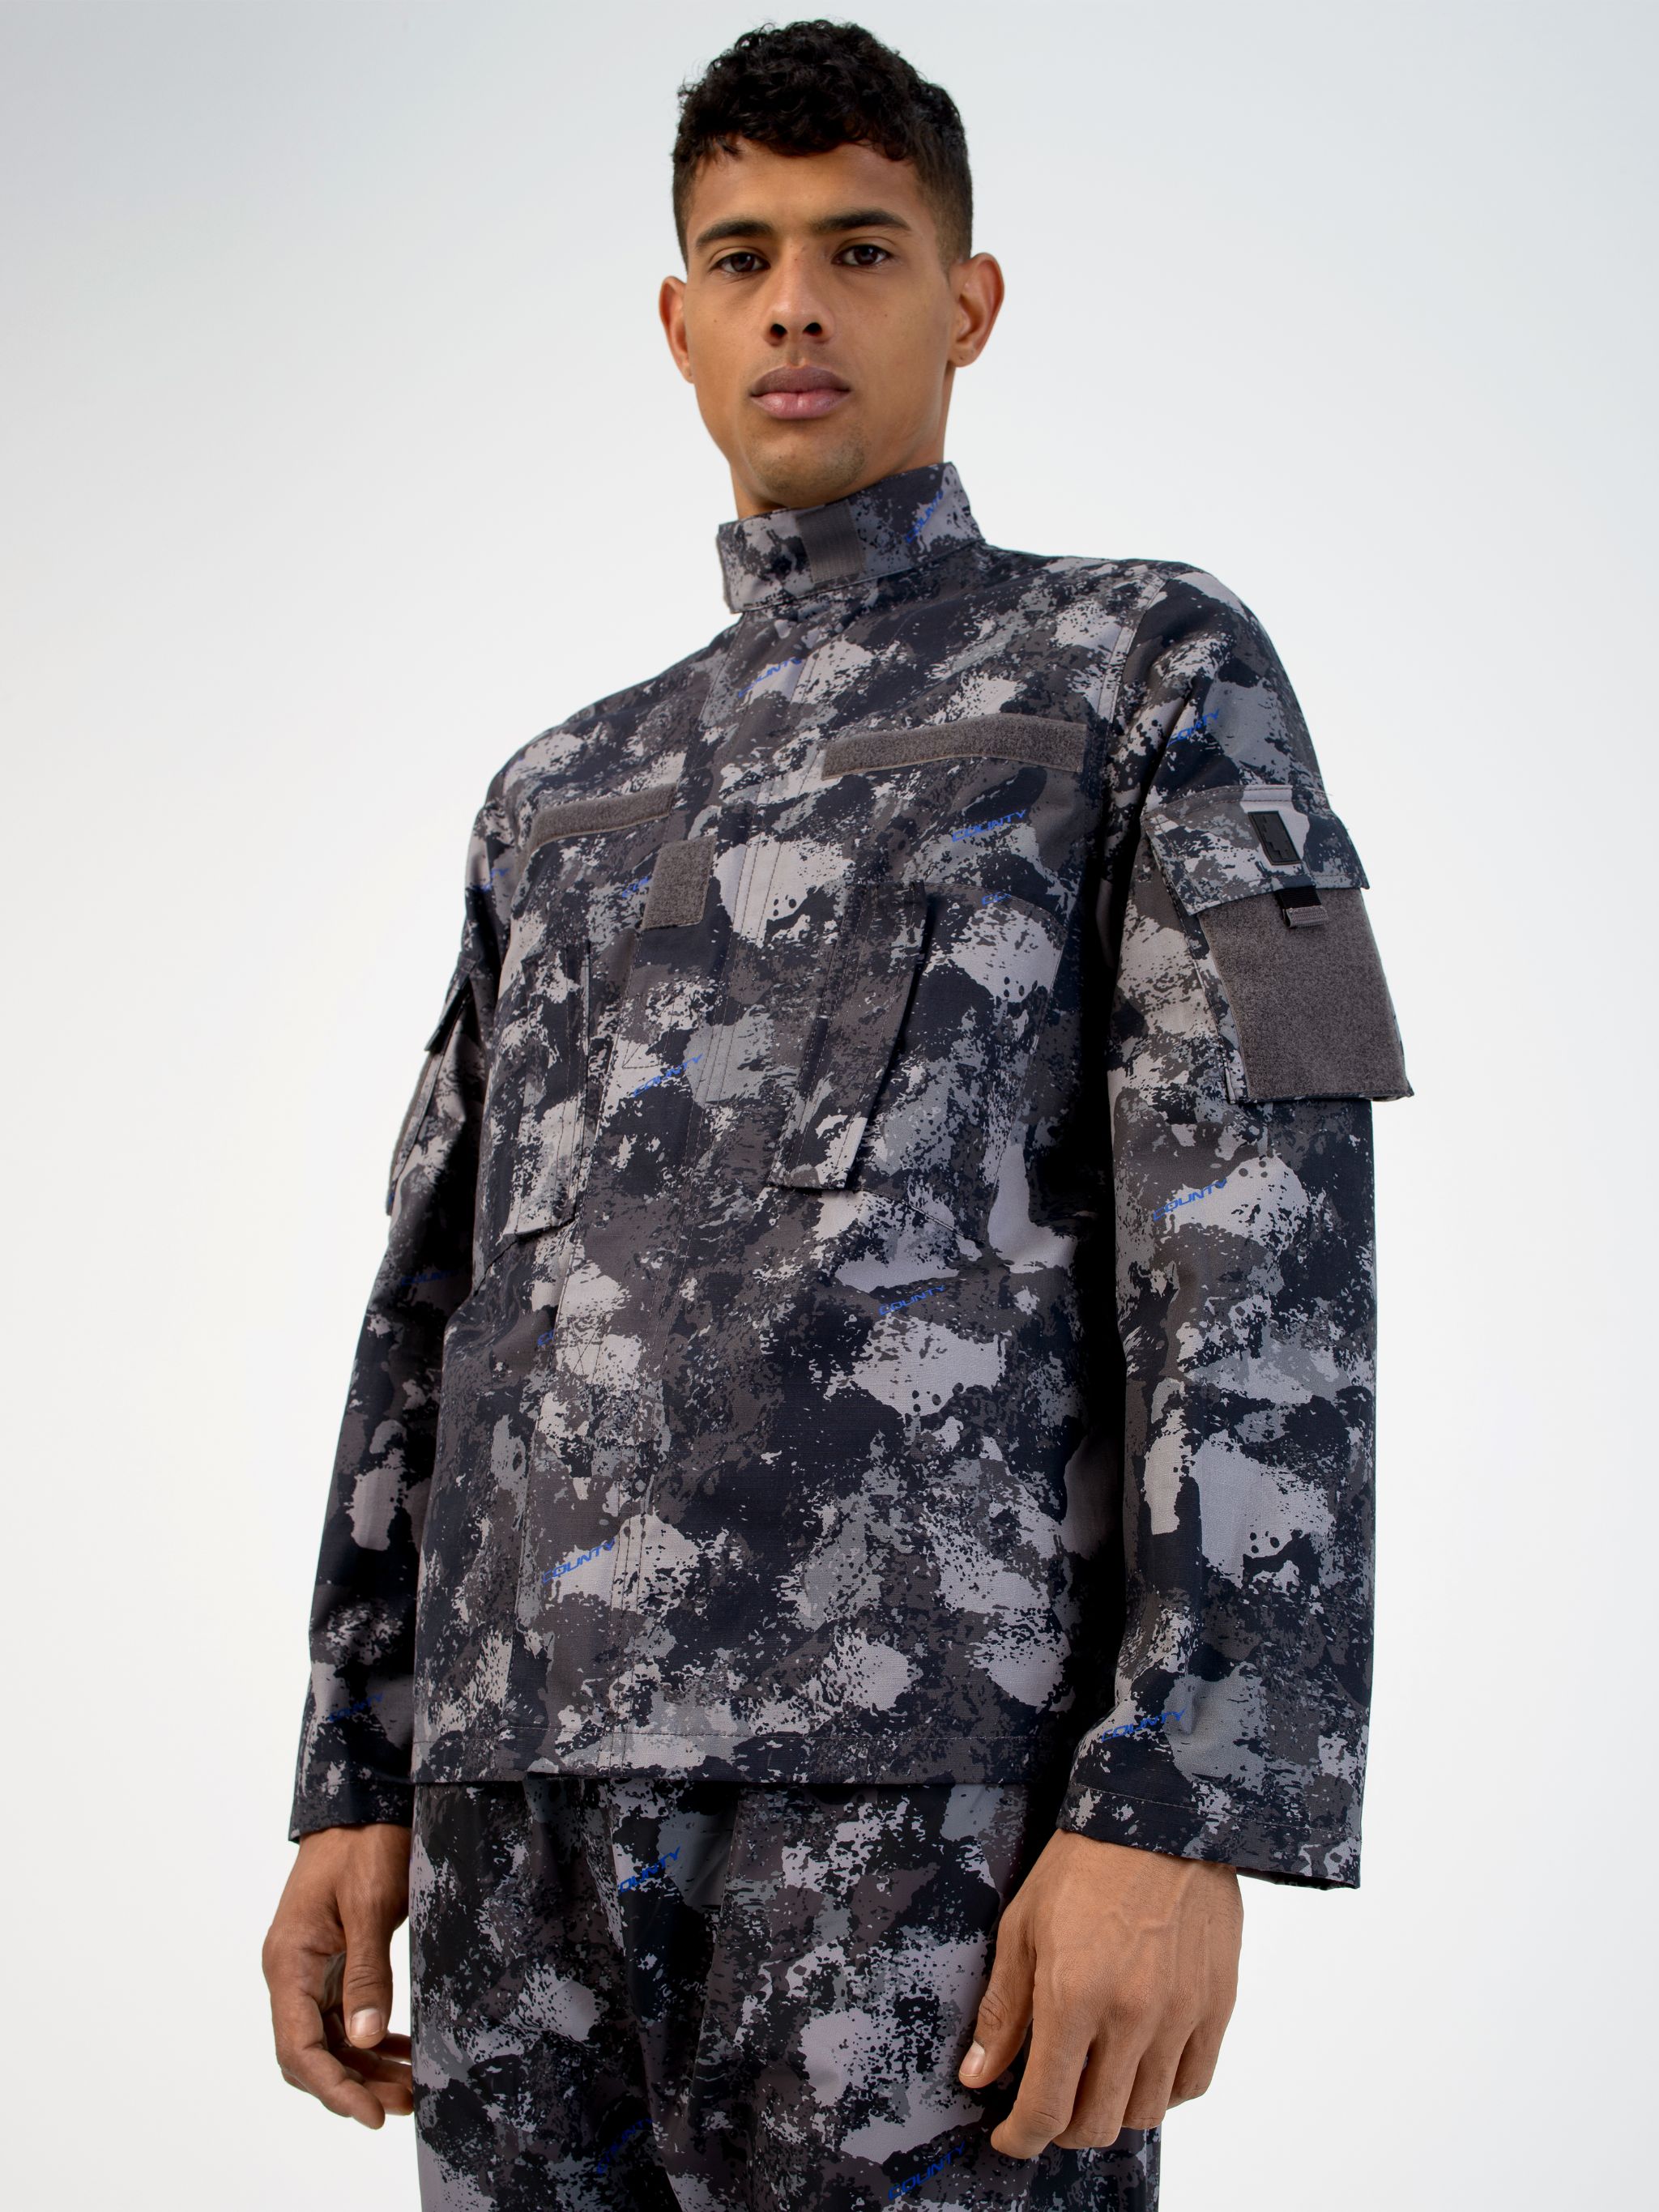 Multicolour cotton-blend camouflage print military jacket from Marcelo Burlon County of Milan featuring camouflage print, stand-up collar, concealed front fastening, long sleeves and straight hem.